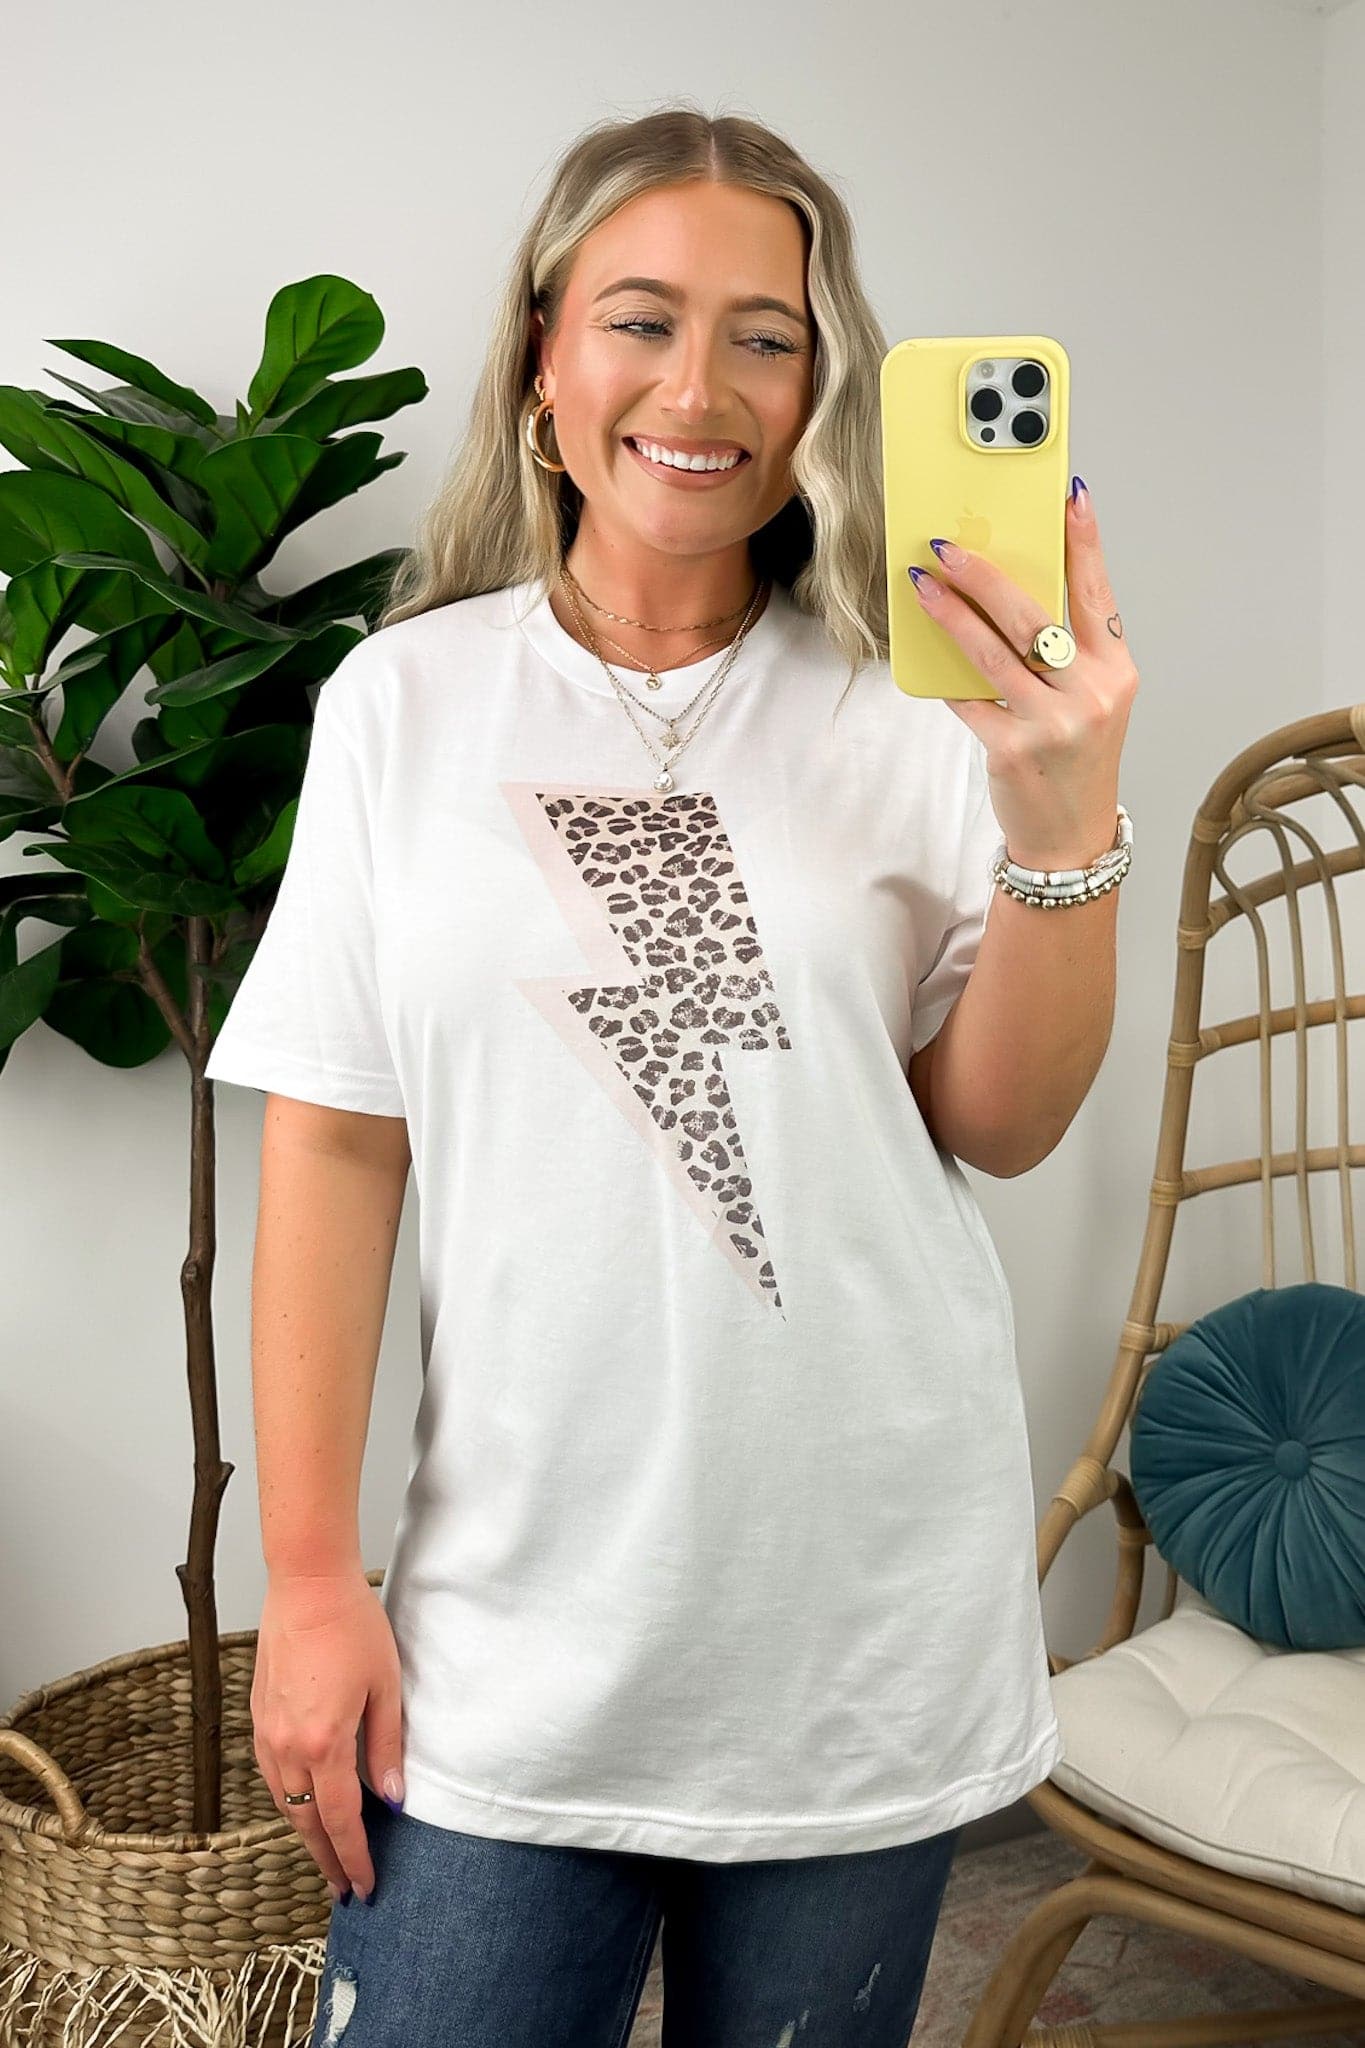  Wild Lightning Bolt Oversized Graphic Tee - FINAL SALE - Madison and Mallory